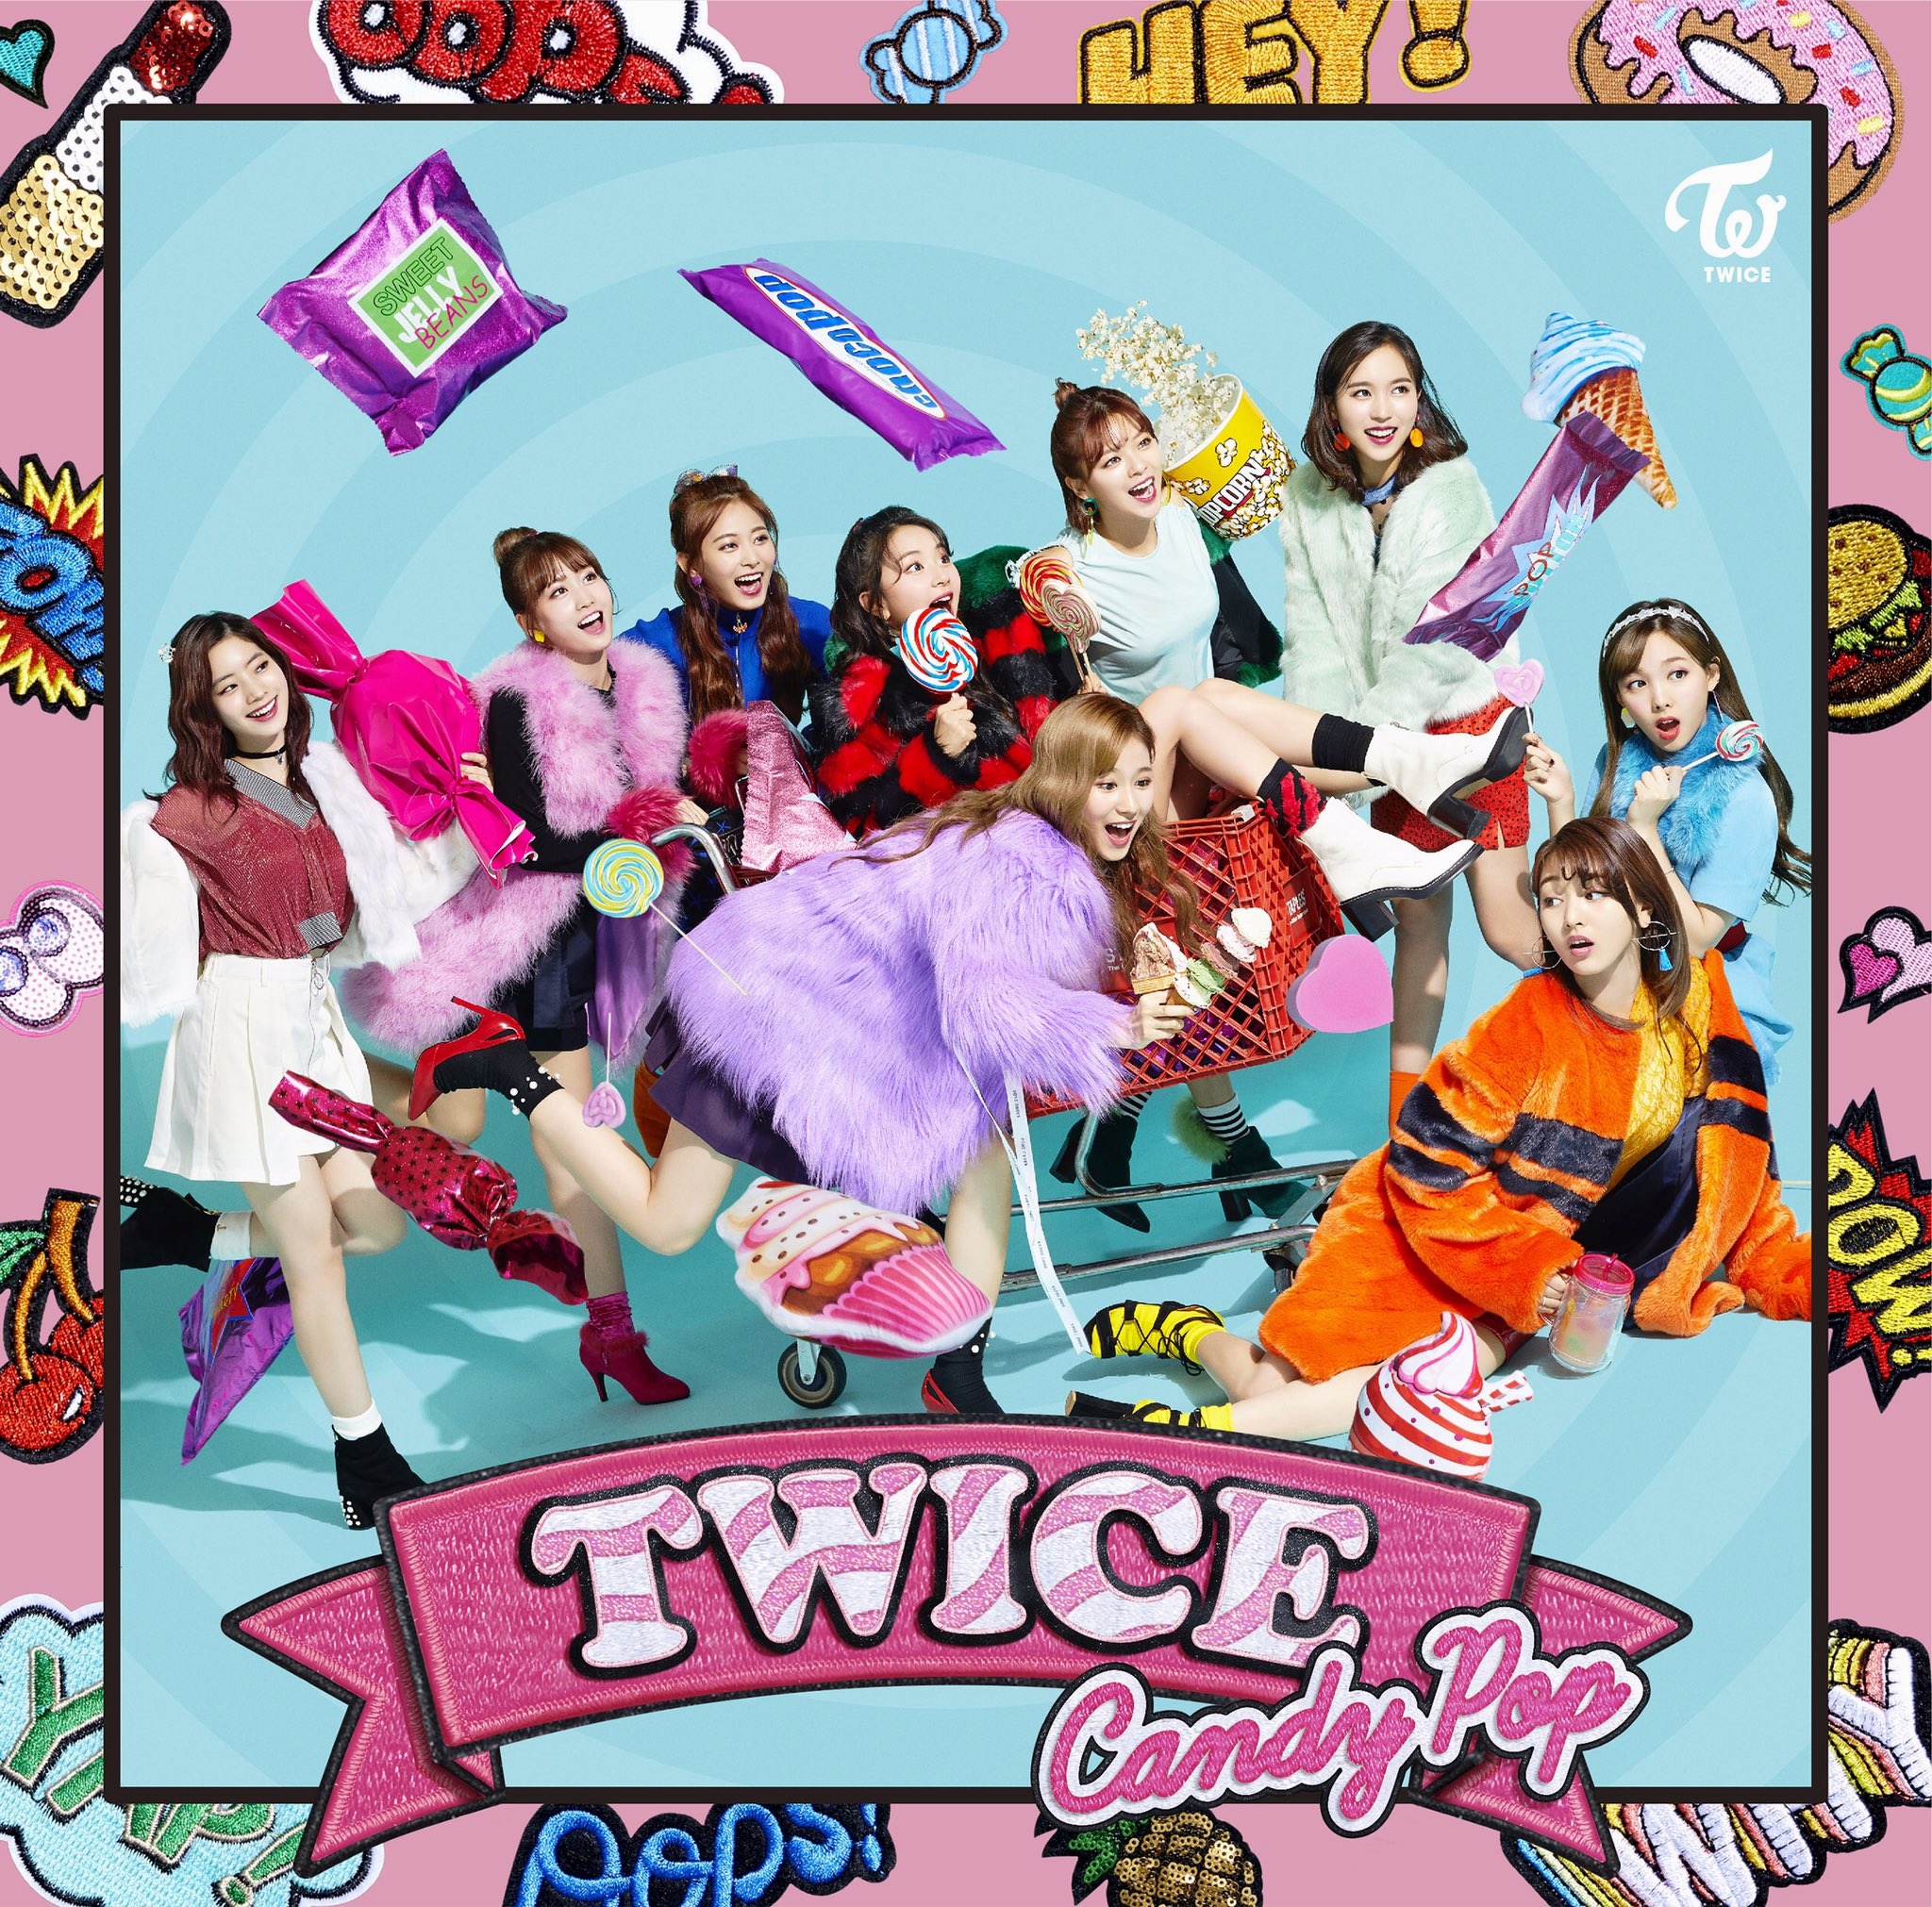 20180326.1055.3 Twice - Candy Pop (Type A) (DVD.iso) cover 1.jpg